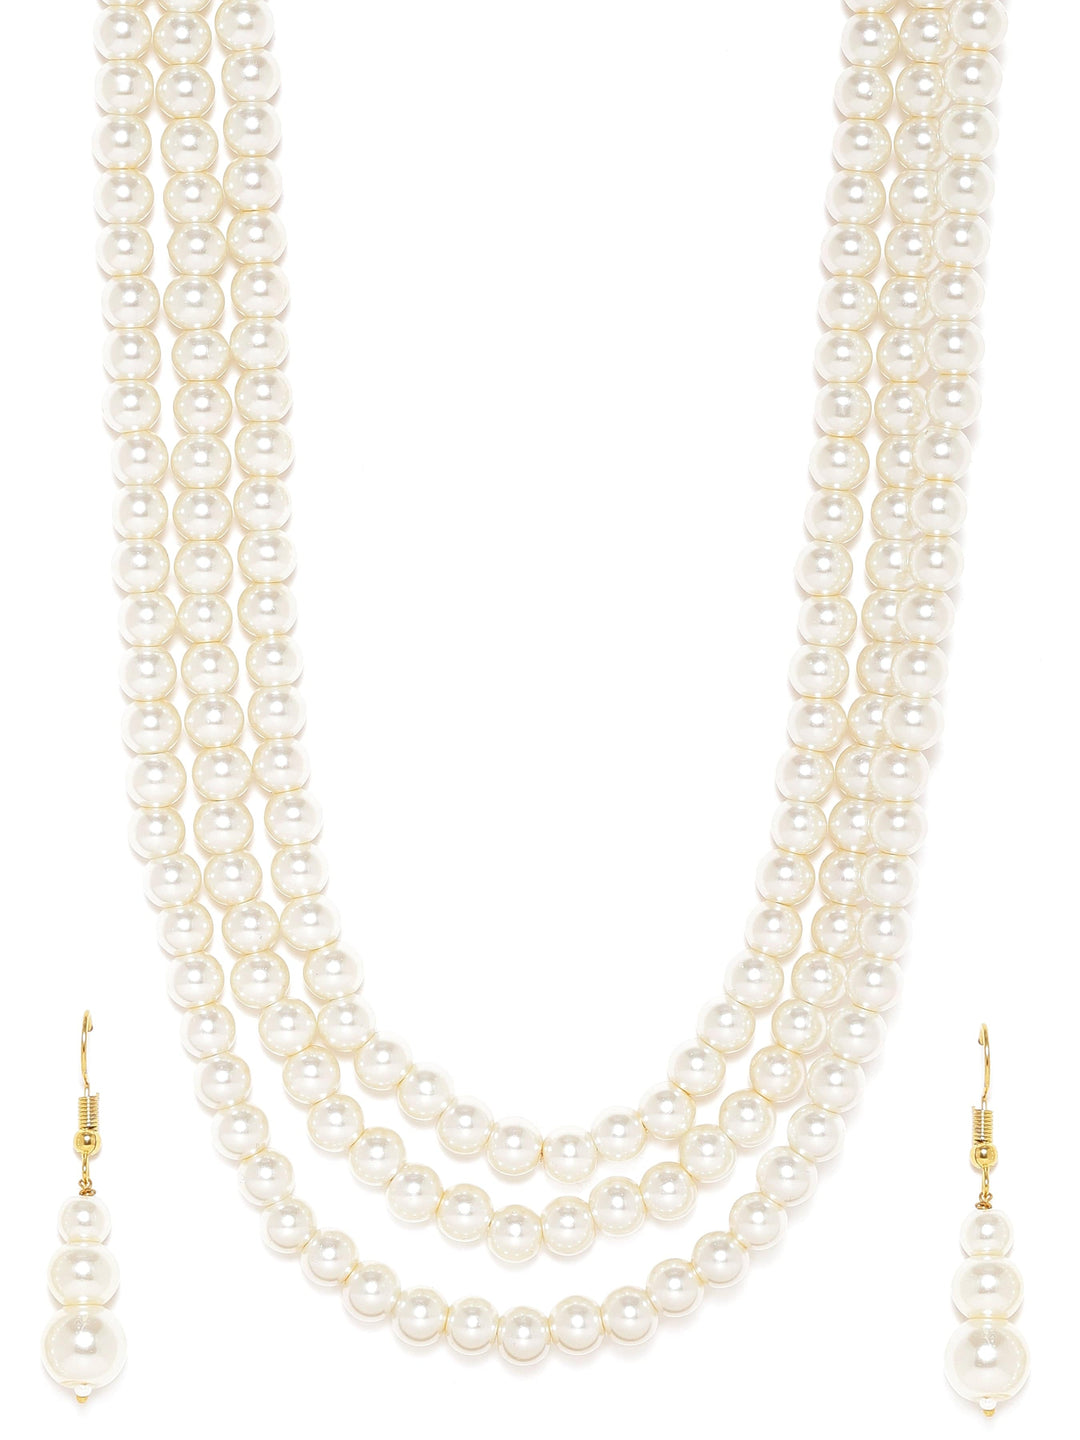 Trilogy of Elegance 3-Layer Pearl Beaded Necklace Set Necklace